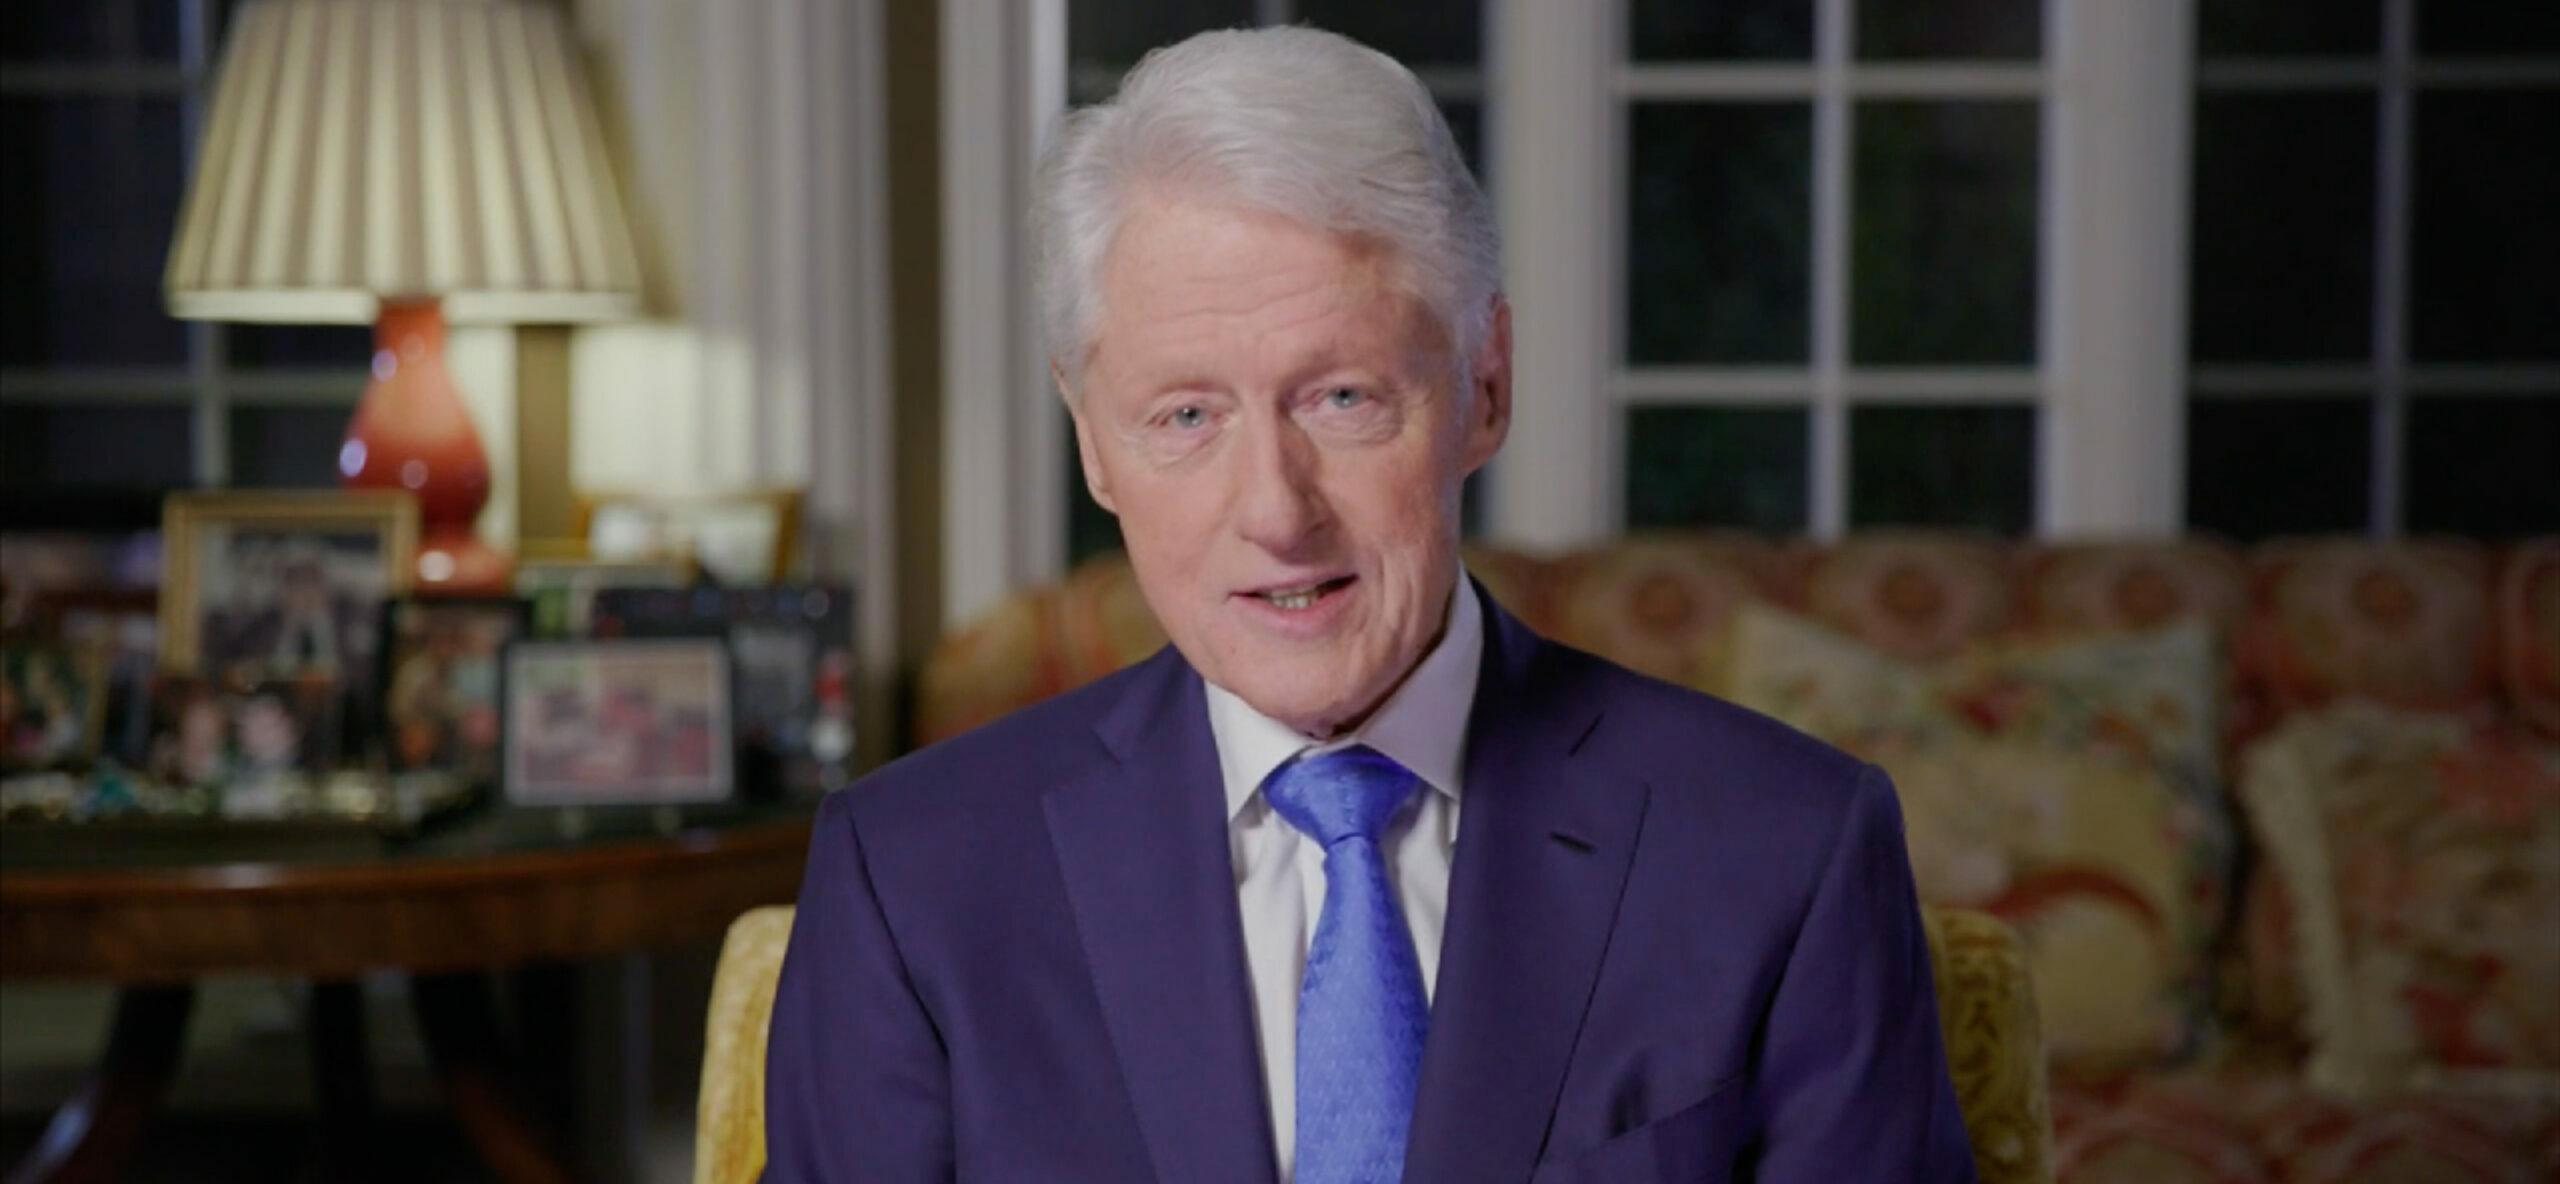 Ex-President Bill Clinton Revealed He Sent Officials To Area 51 To Check For Alien Life Forms